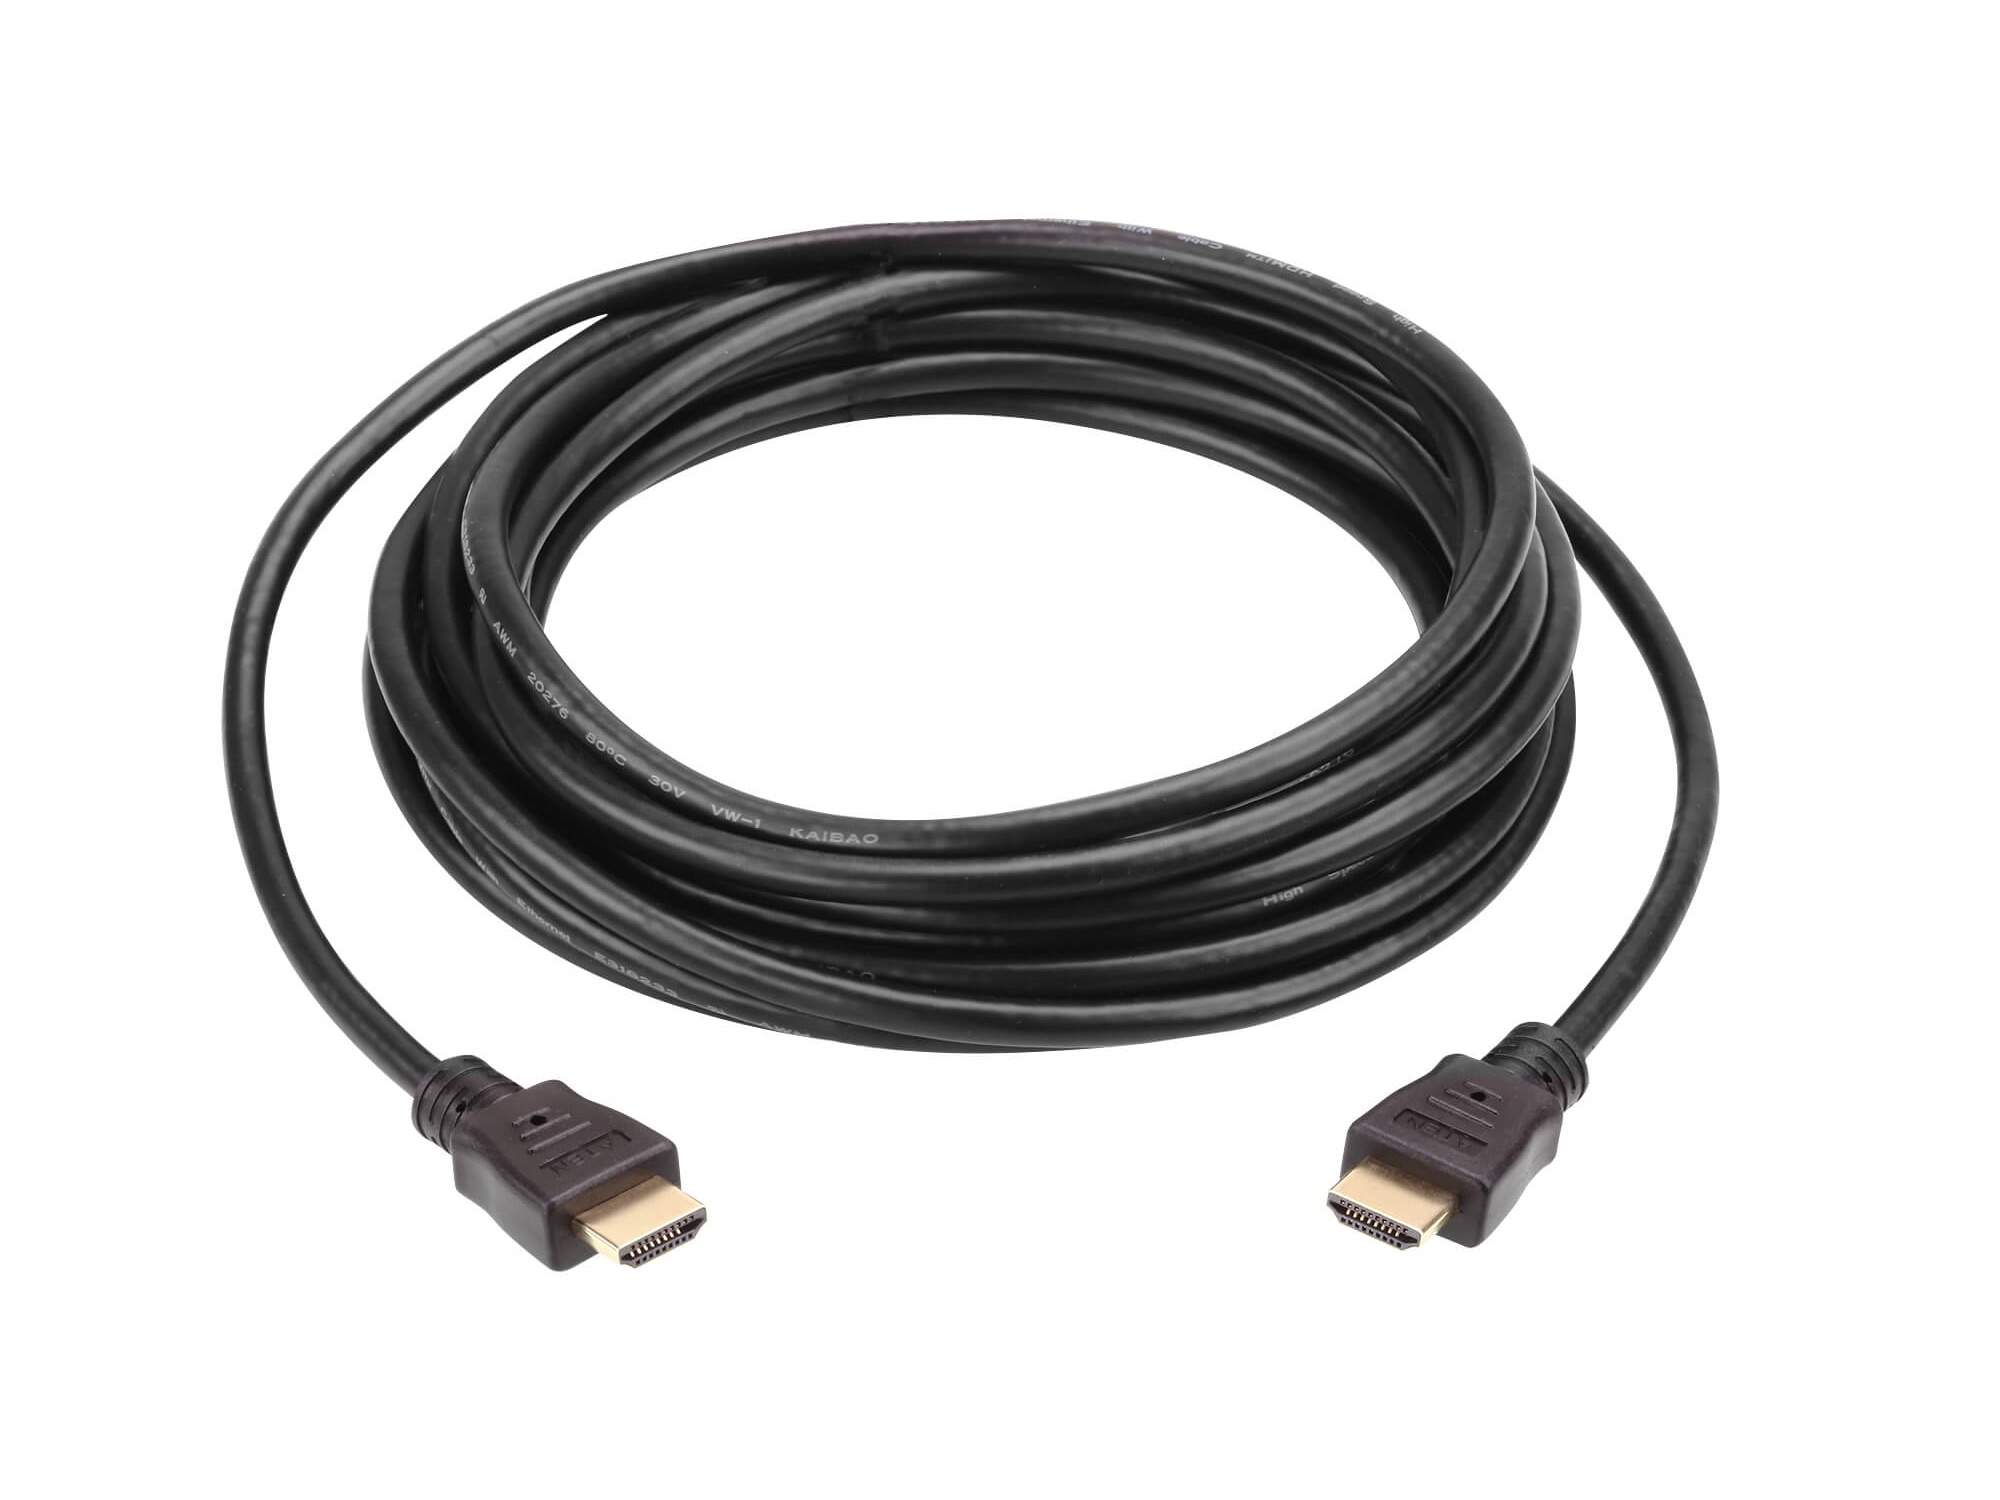 Aten 2L7D20H 20m High Speed HDMI Cable with Ethernet